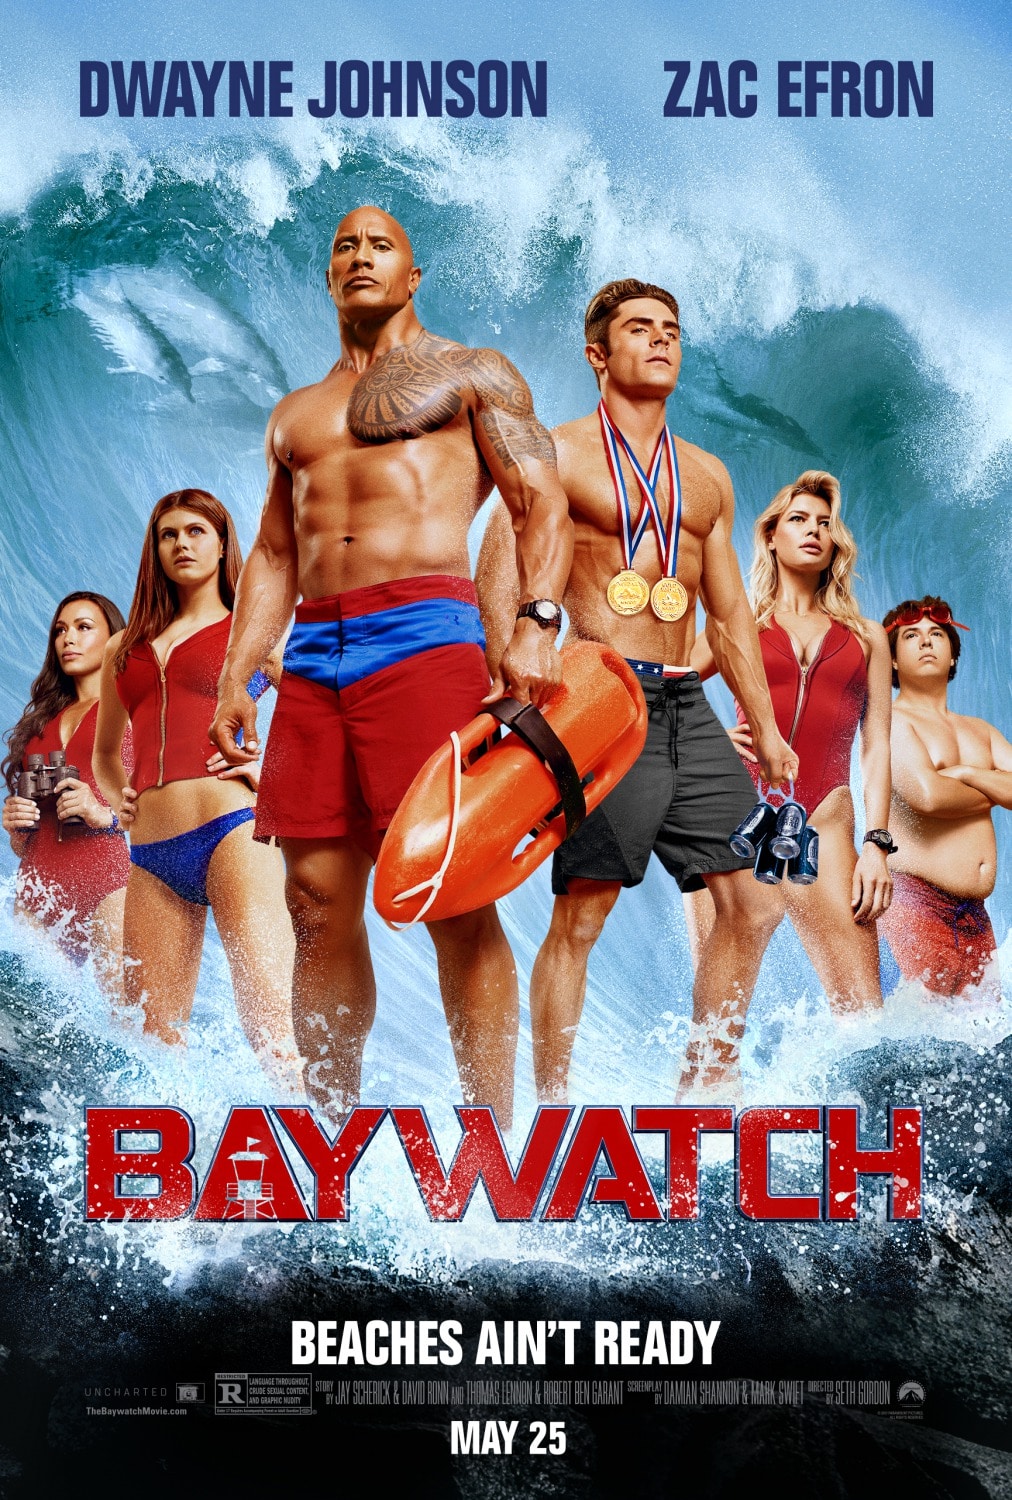 Baywatch – Movie Review